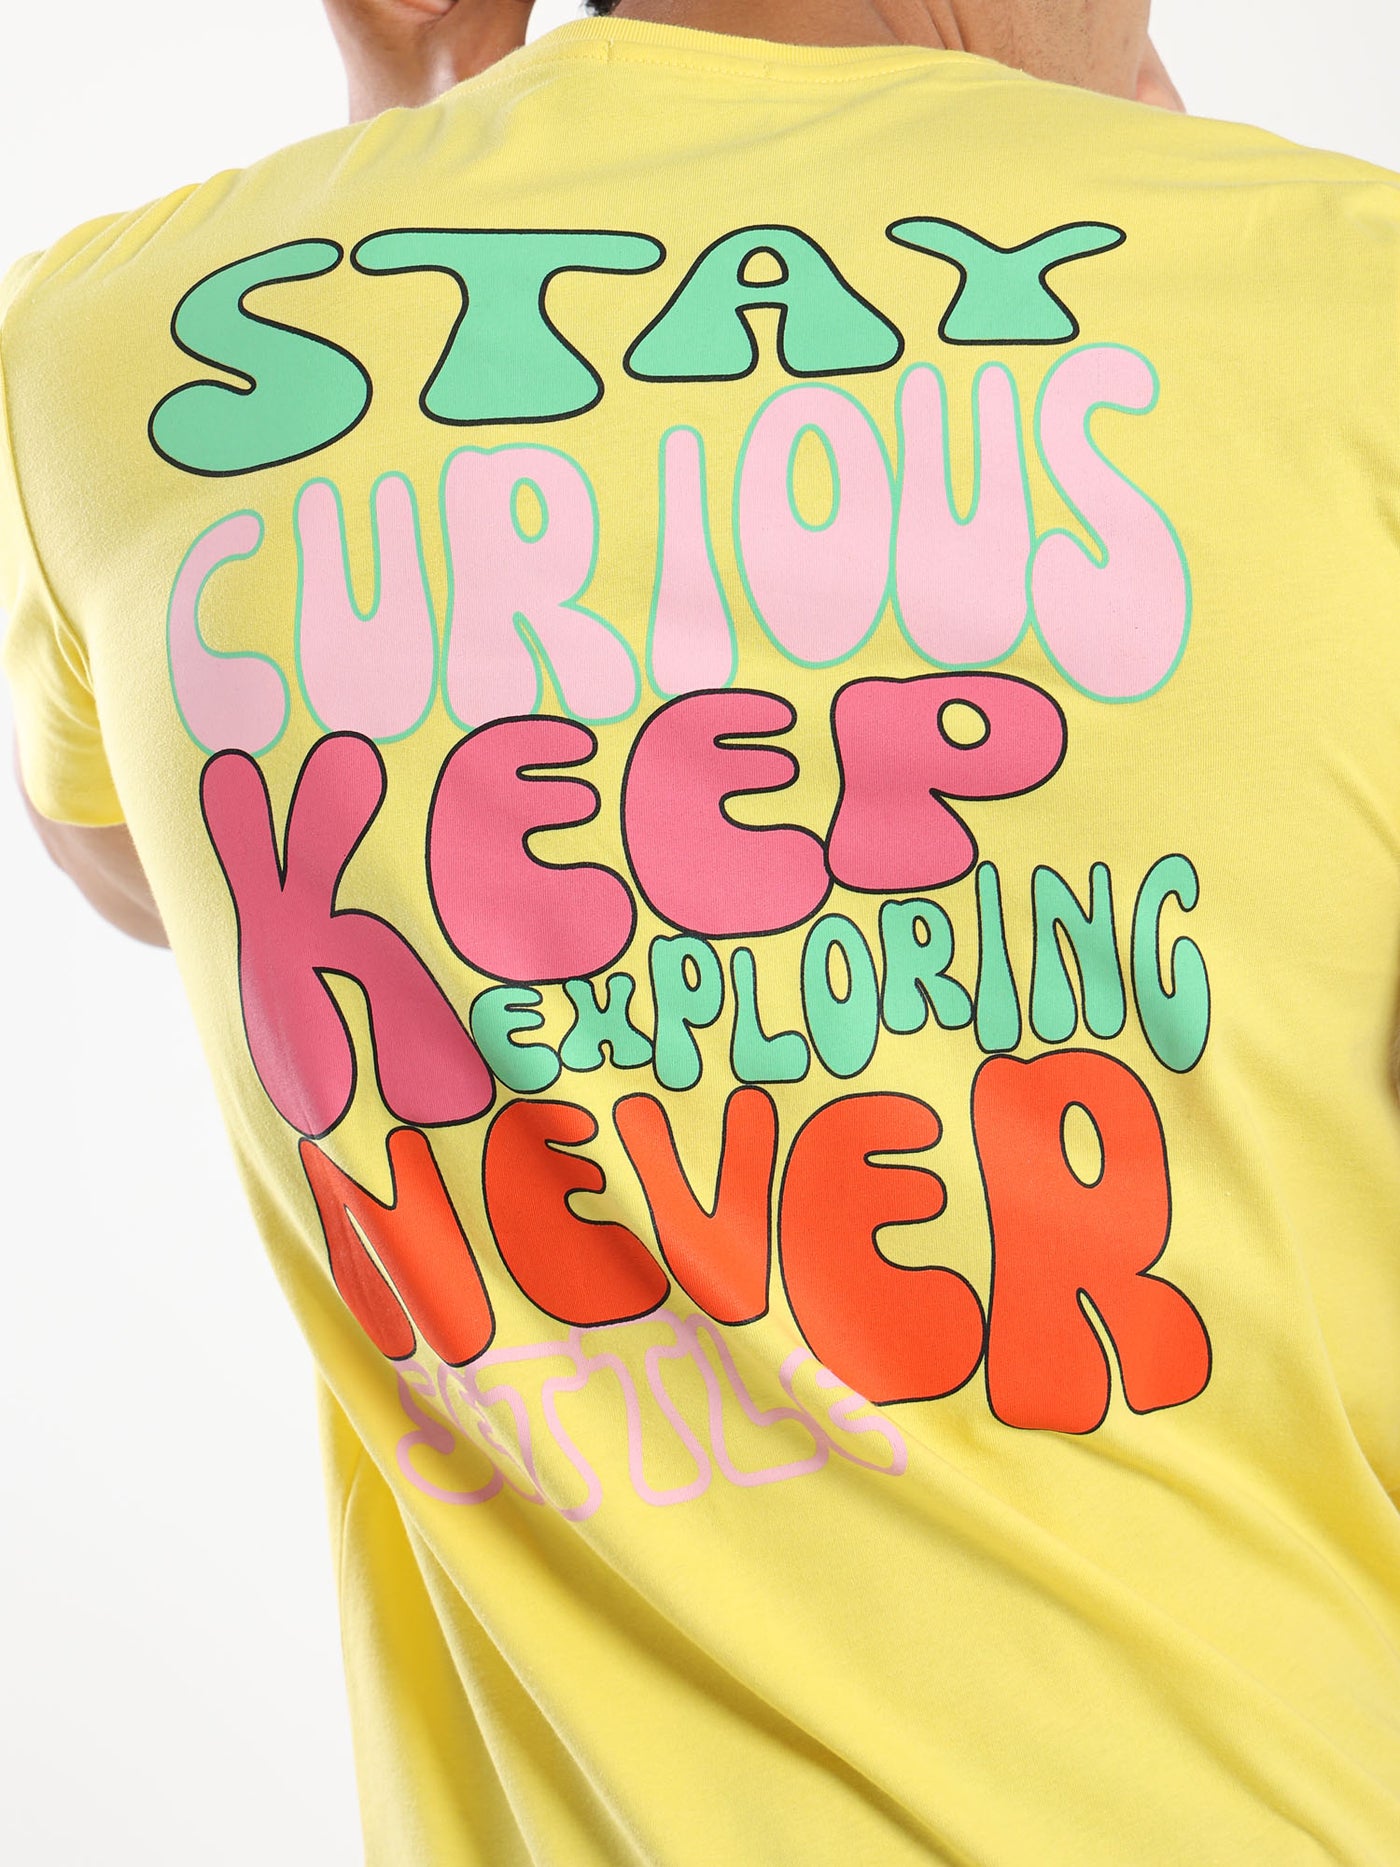 T-Shirt - "Stay Curious" Back Print - Round Neck